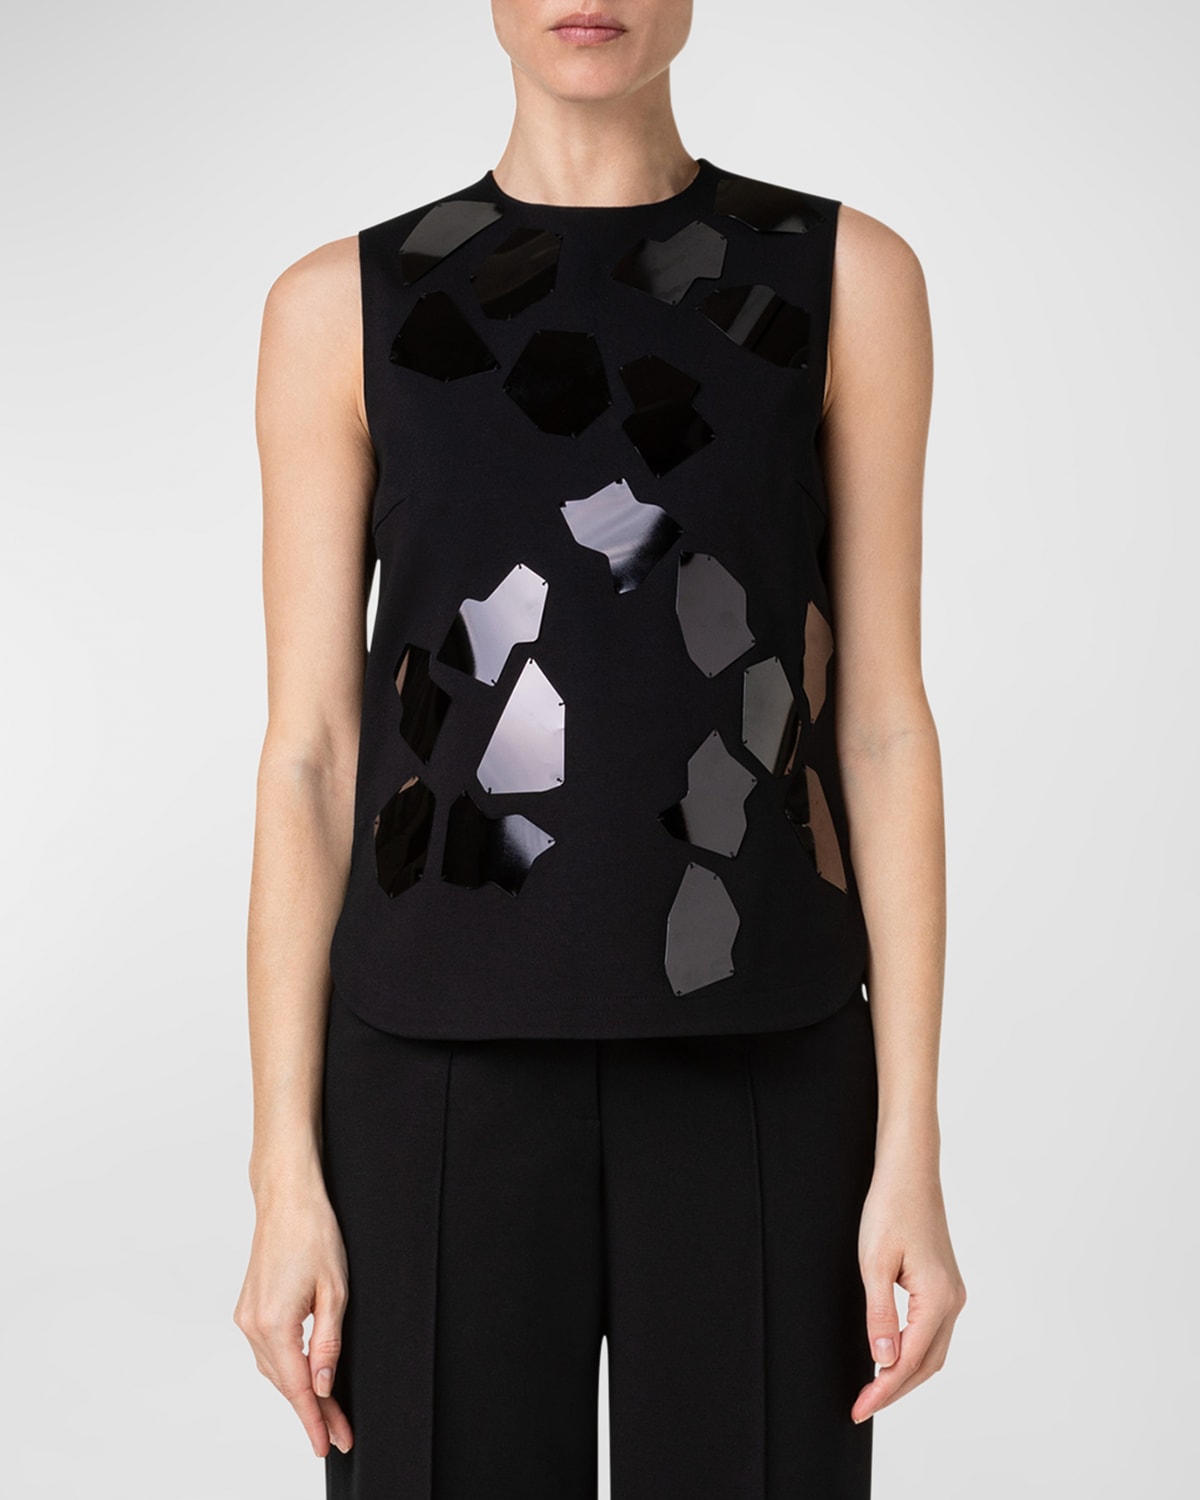 AKRIS PUNTO JERSEY TOP WITH EXTRA-LARGE SEQUIN DETAILS